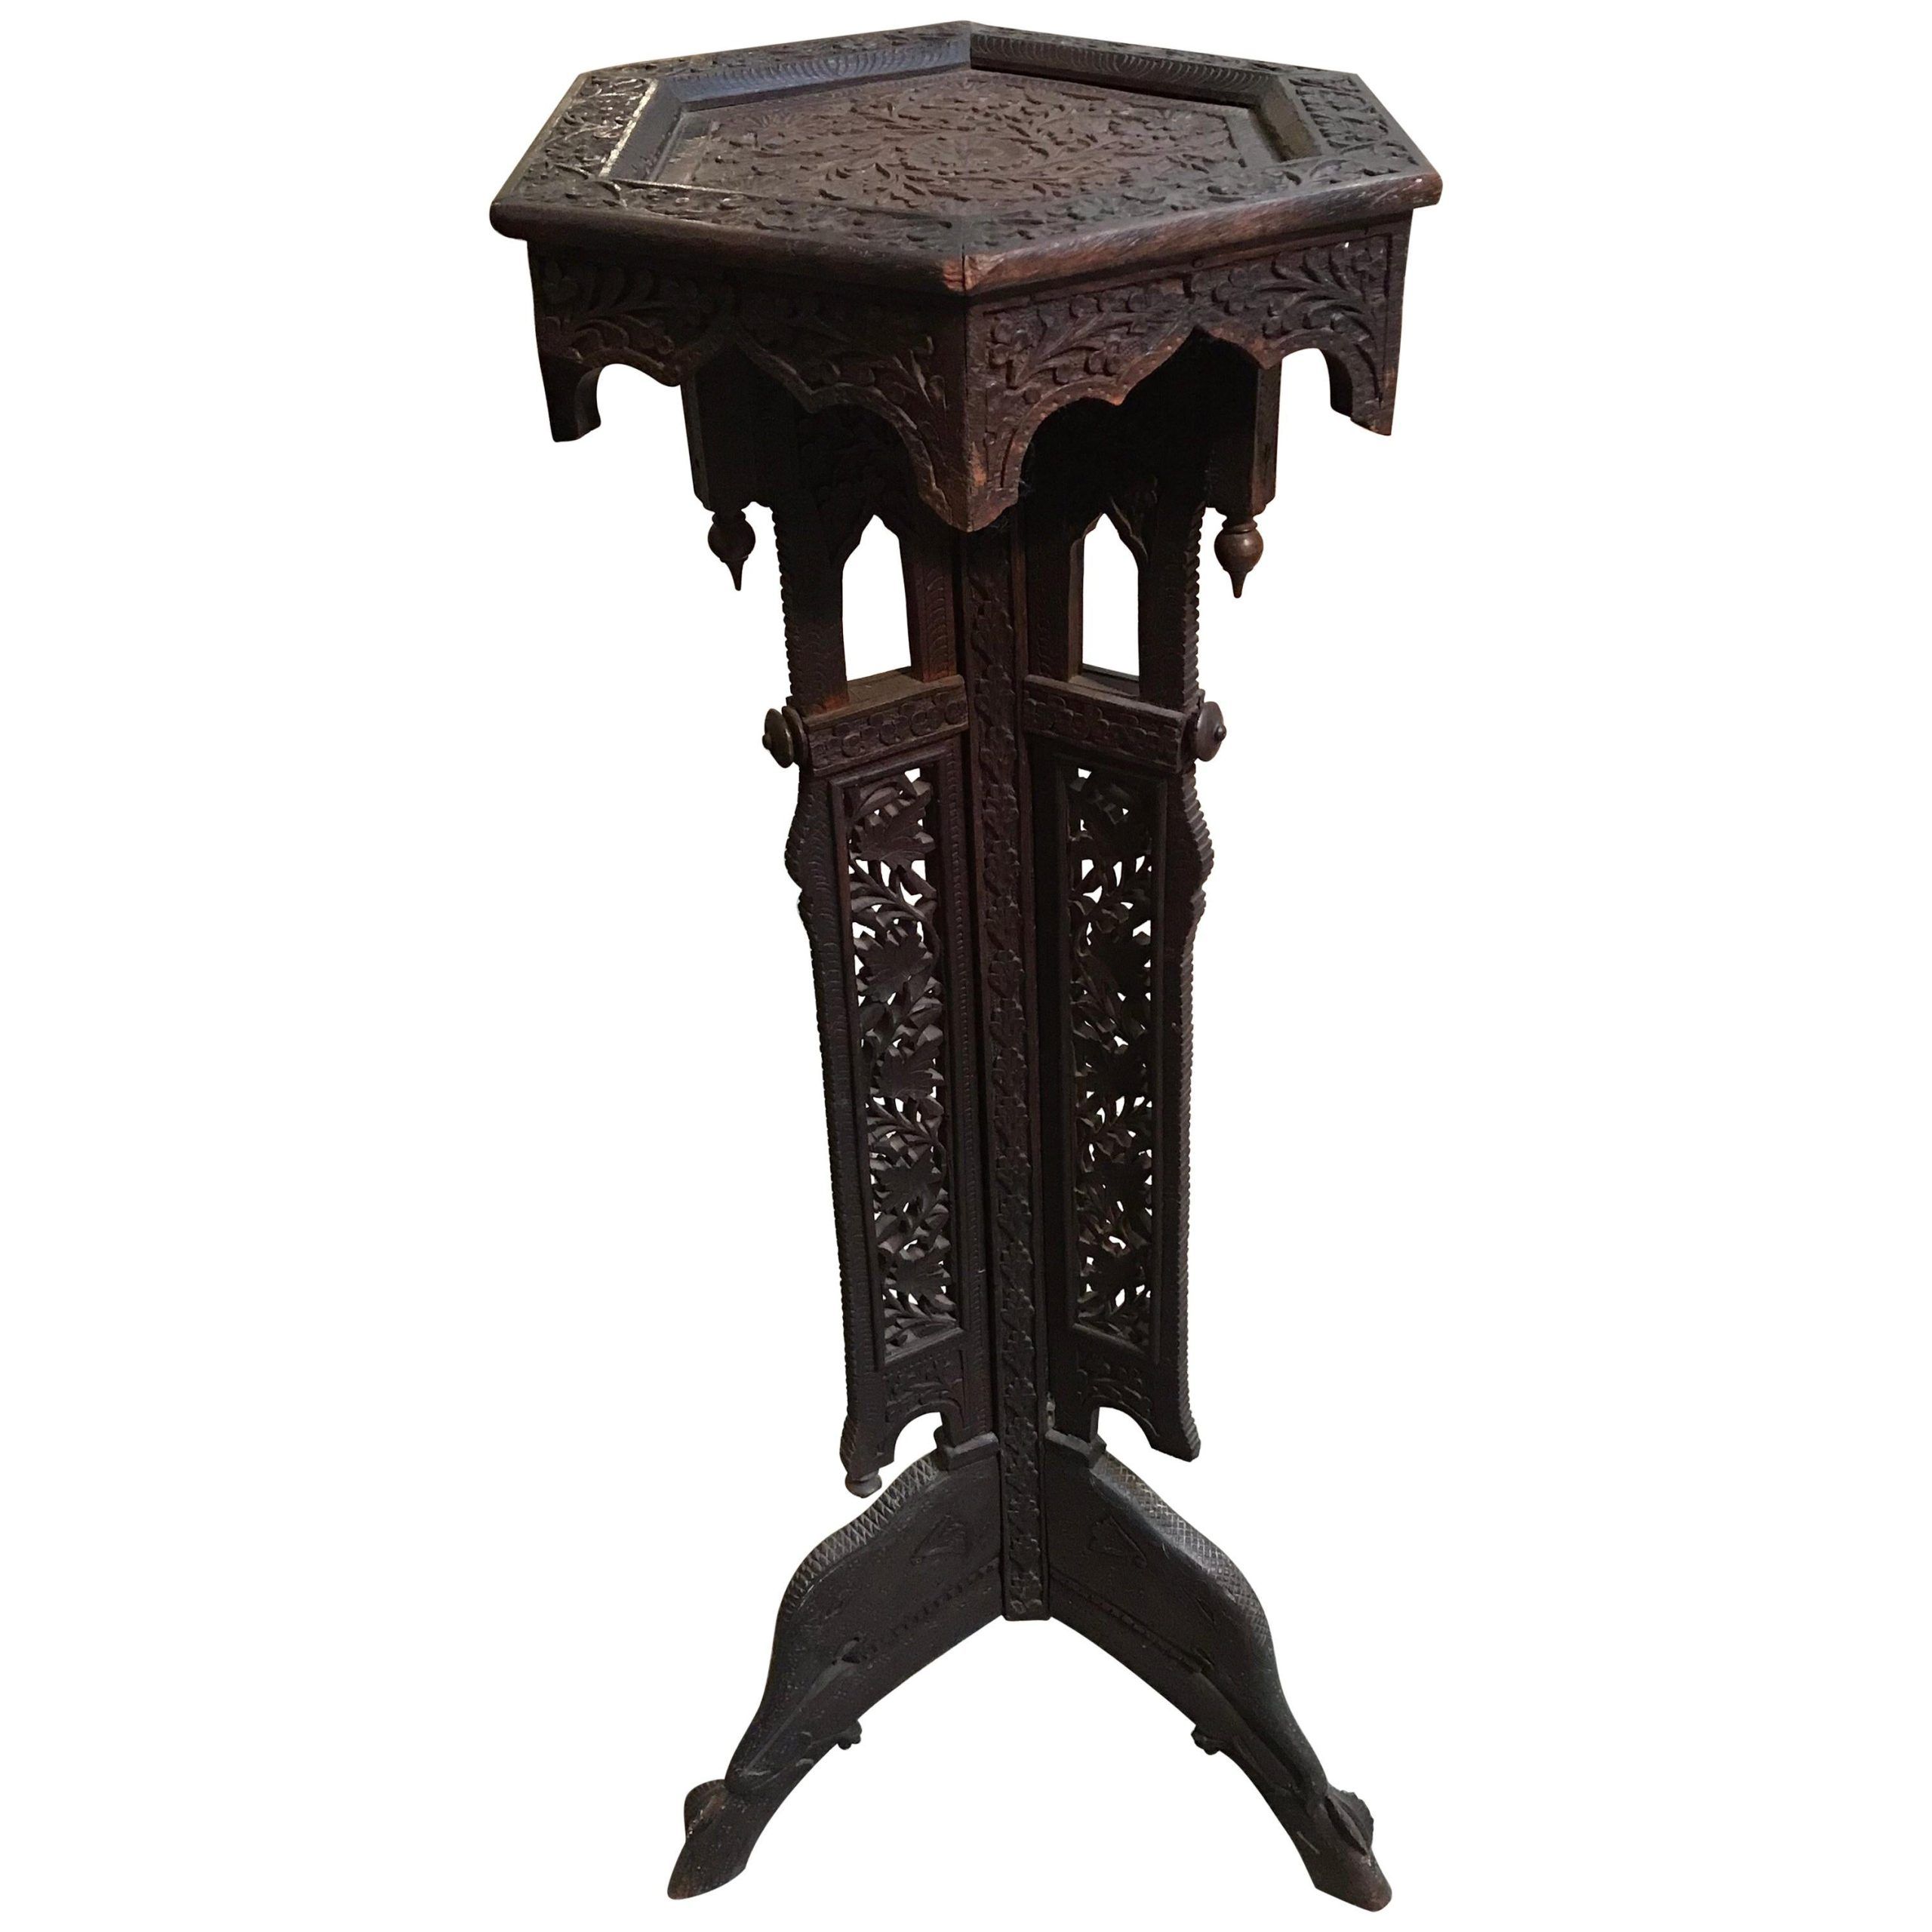 Carved Wooden Indian Plant Stand For Sale At 1stdibs Within Carved Plant Stands (View 8 of 15)